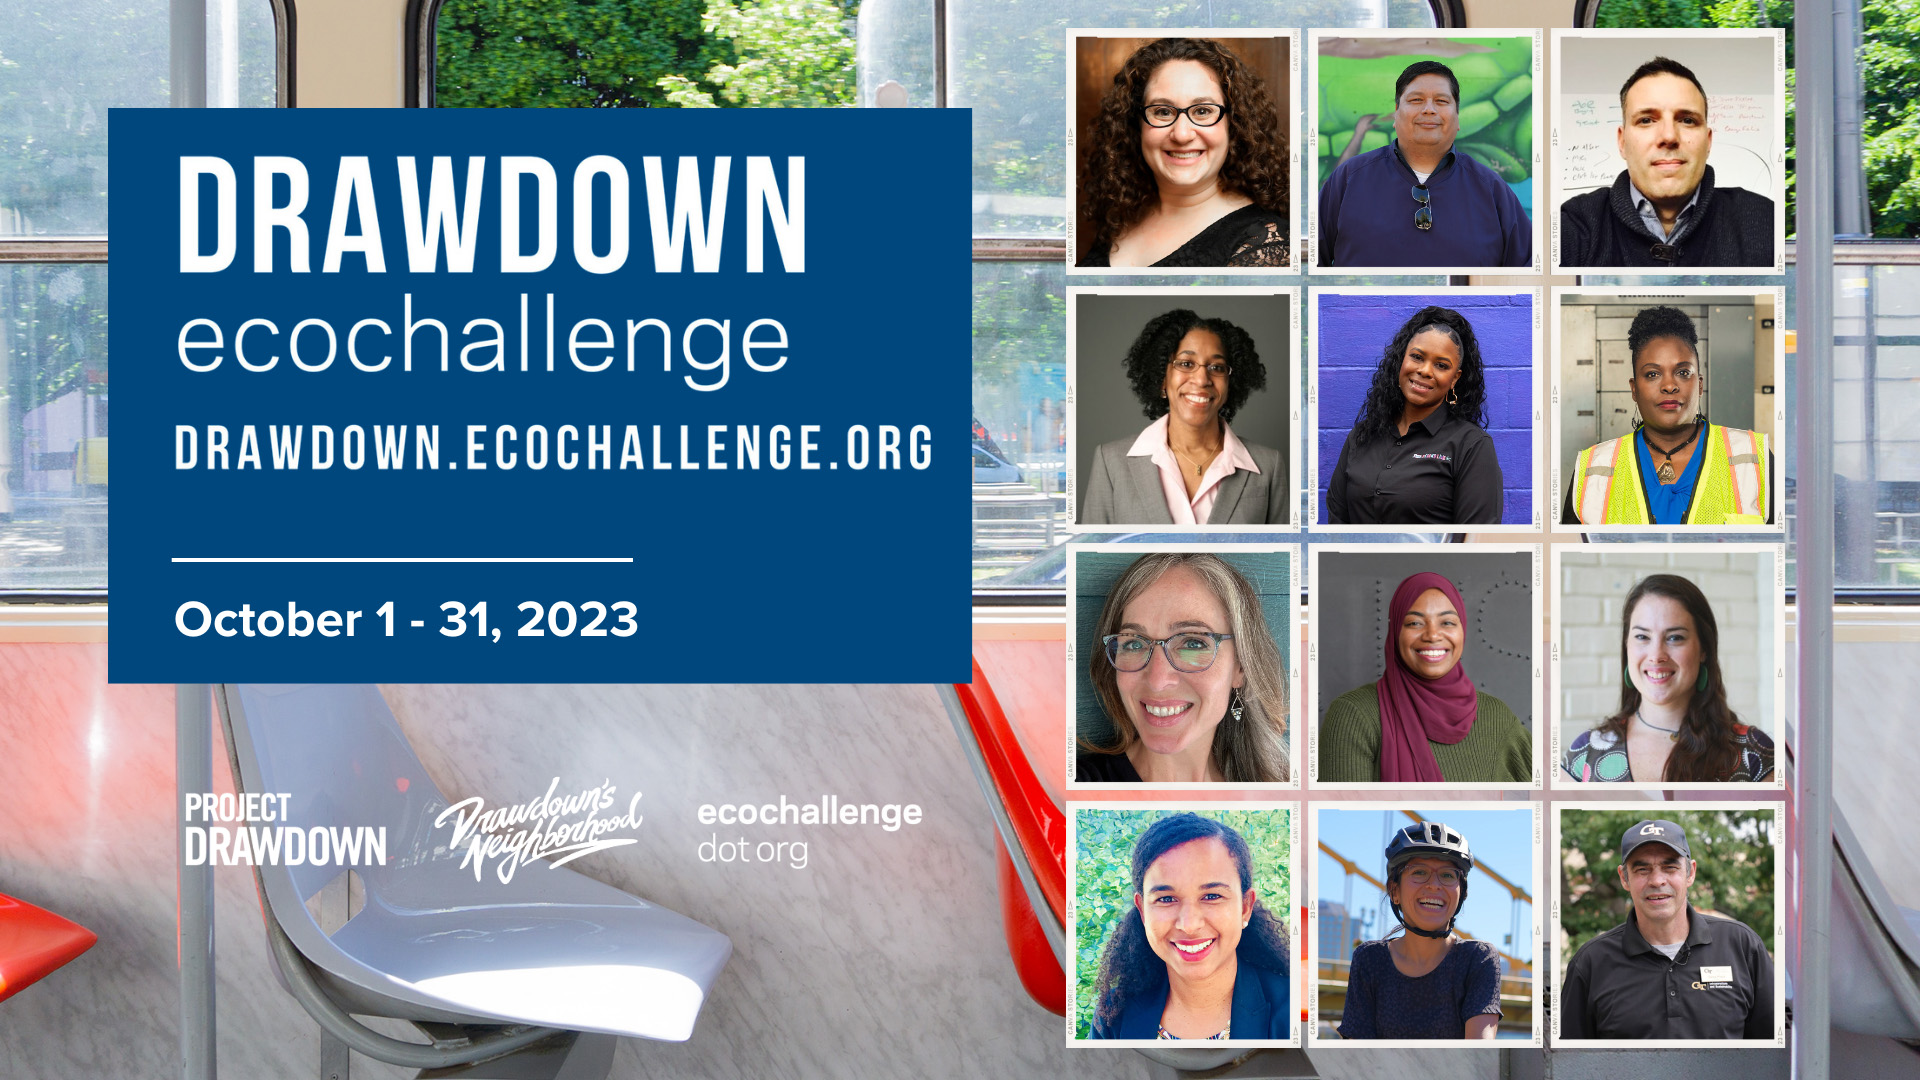 A poster for the Drawdown Ecochallenge with images of featured speakers in the upcoming related webinar series